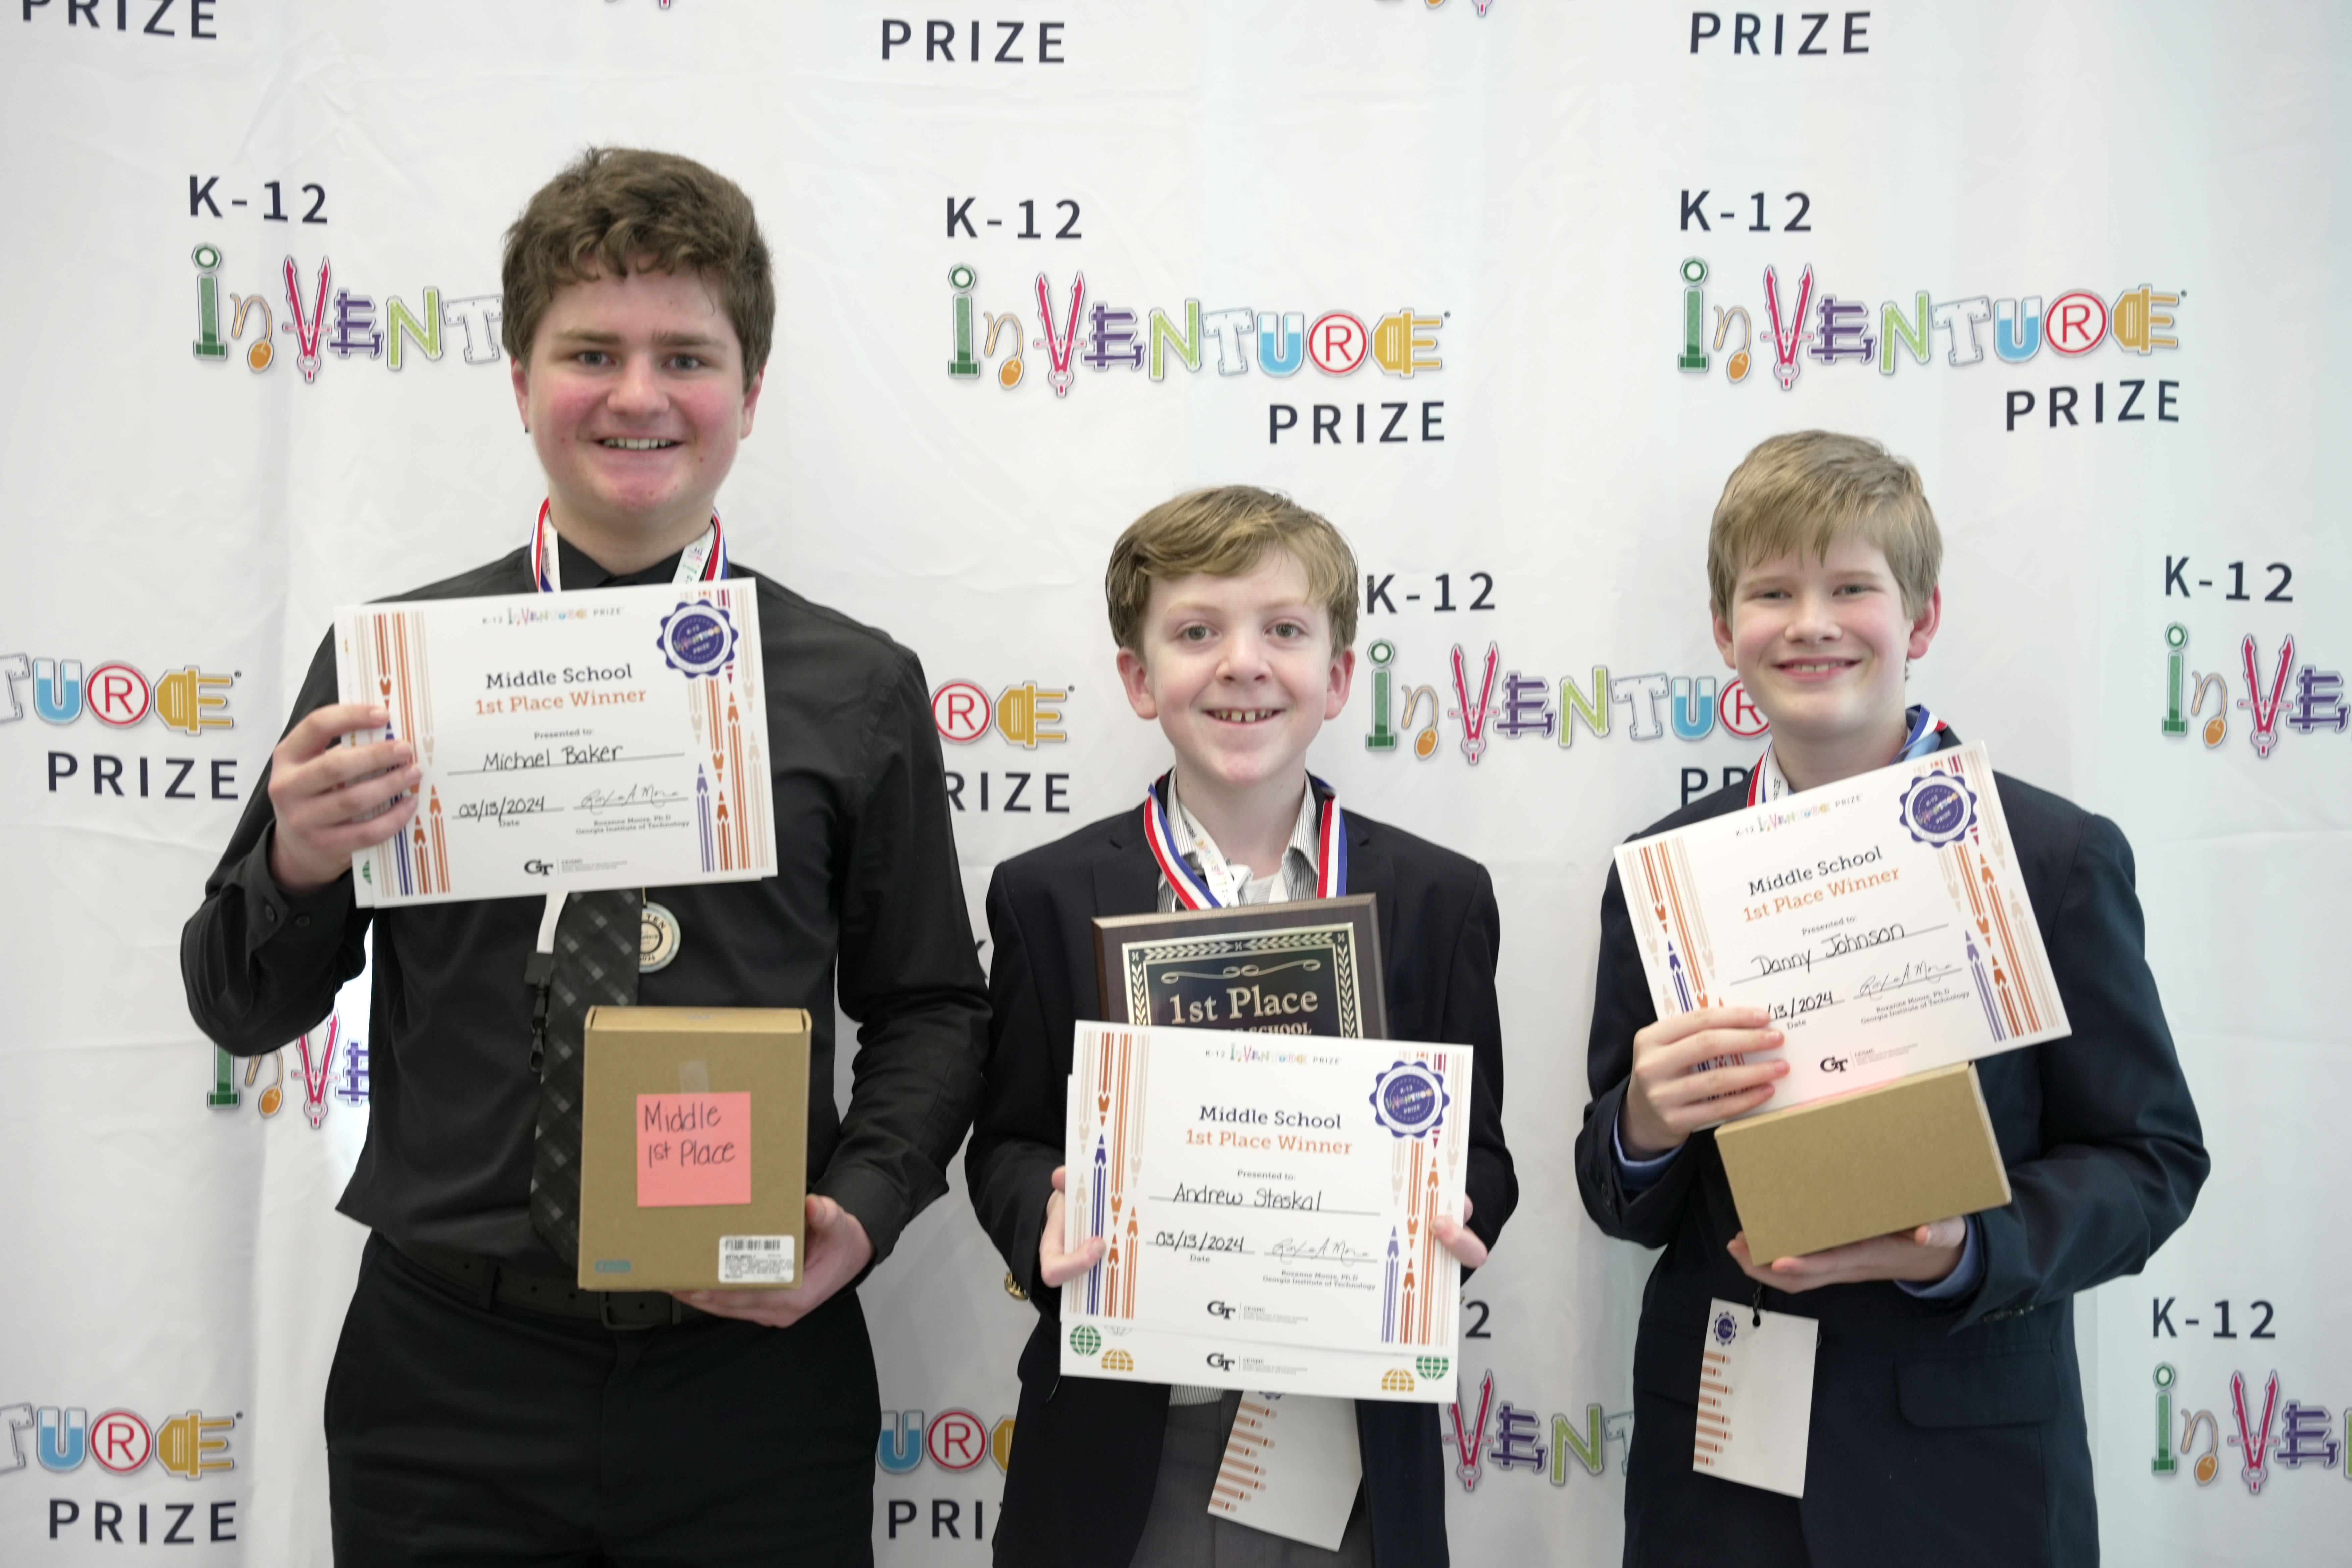 Three smiling students holding certificates, prizes, and a plaque